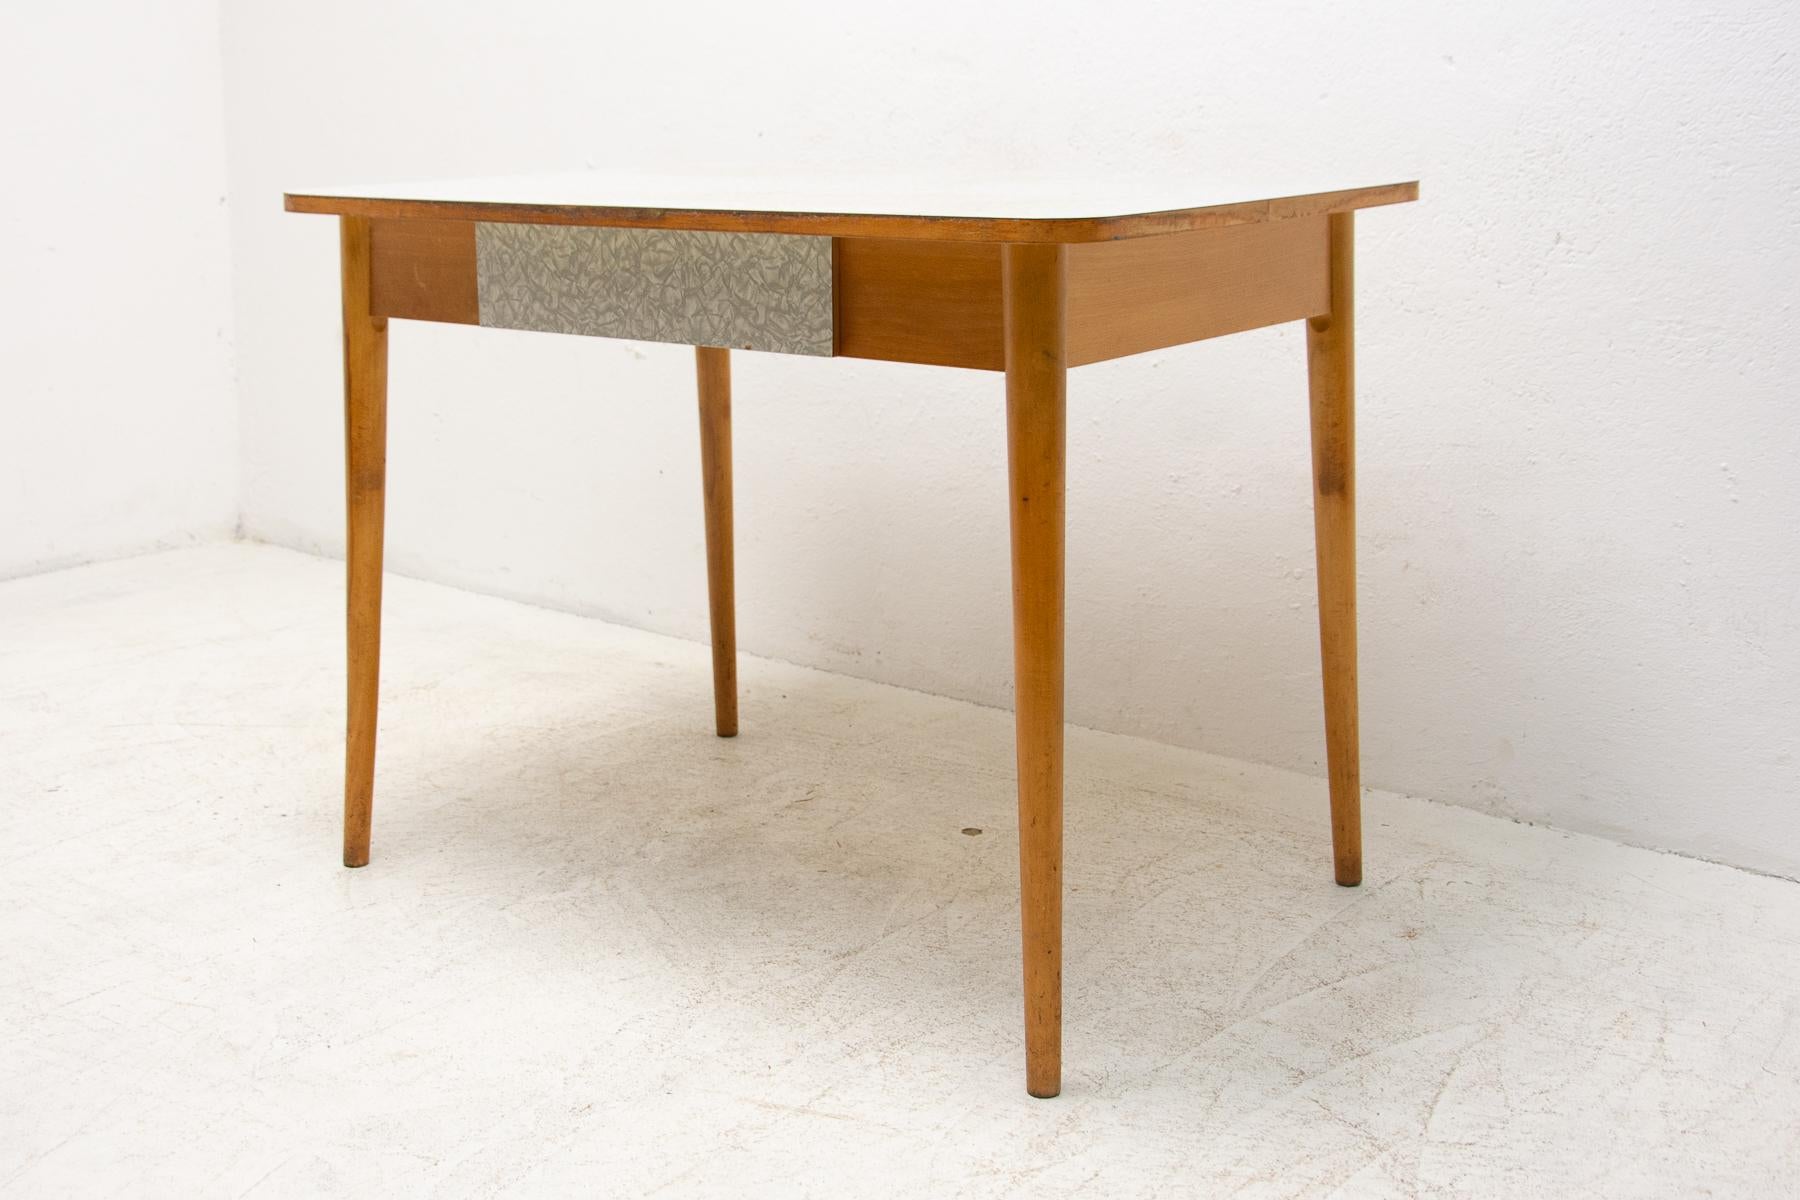  Midcentury Formica and Wood Central Table, Czechoslovakia, 1960's In Good Condition For Sale In Prague 8, CZ